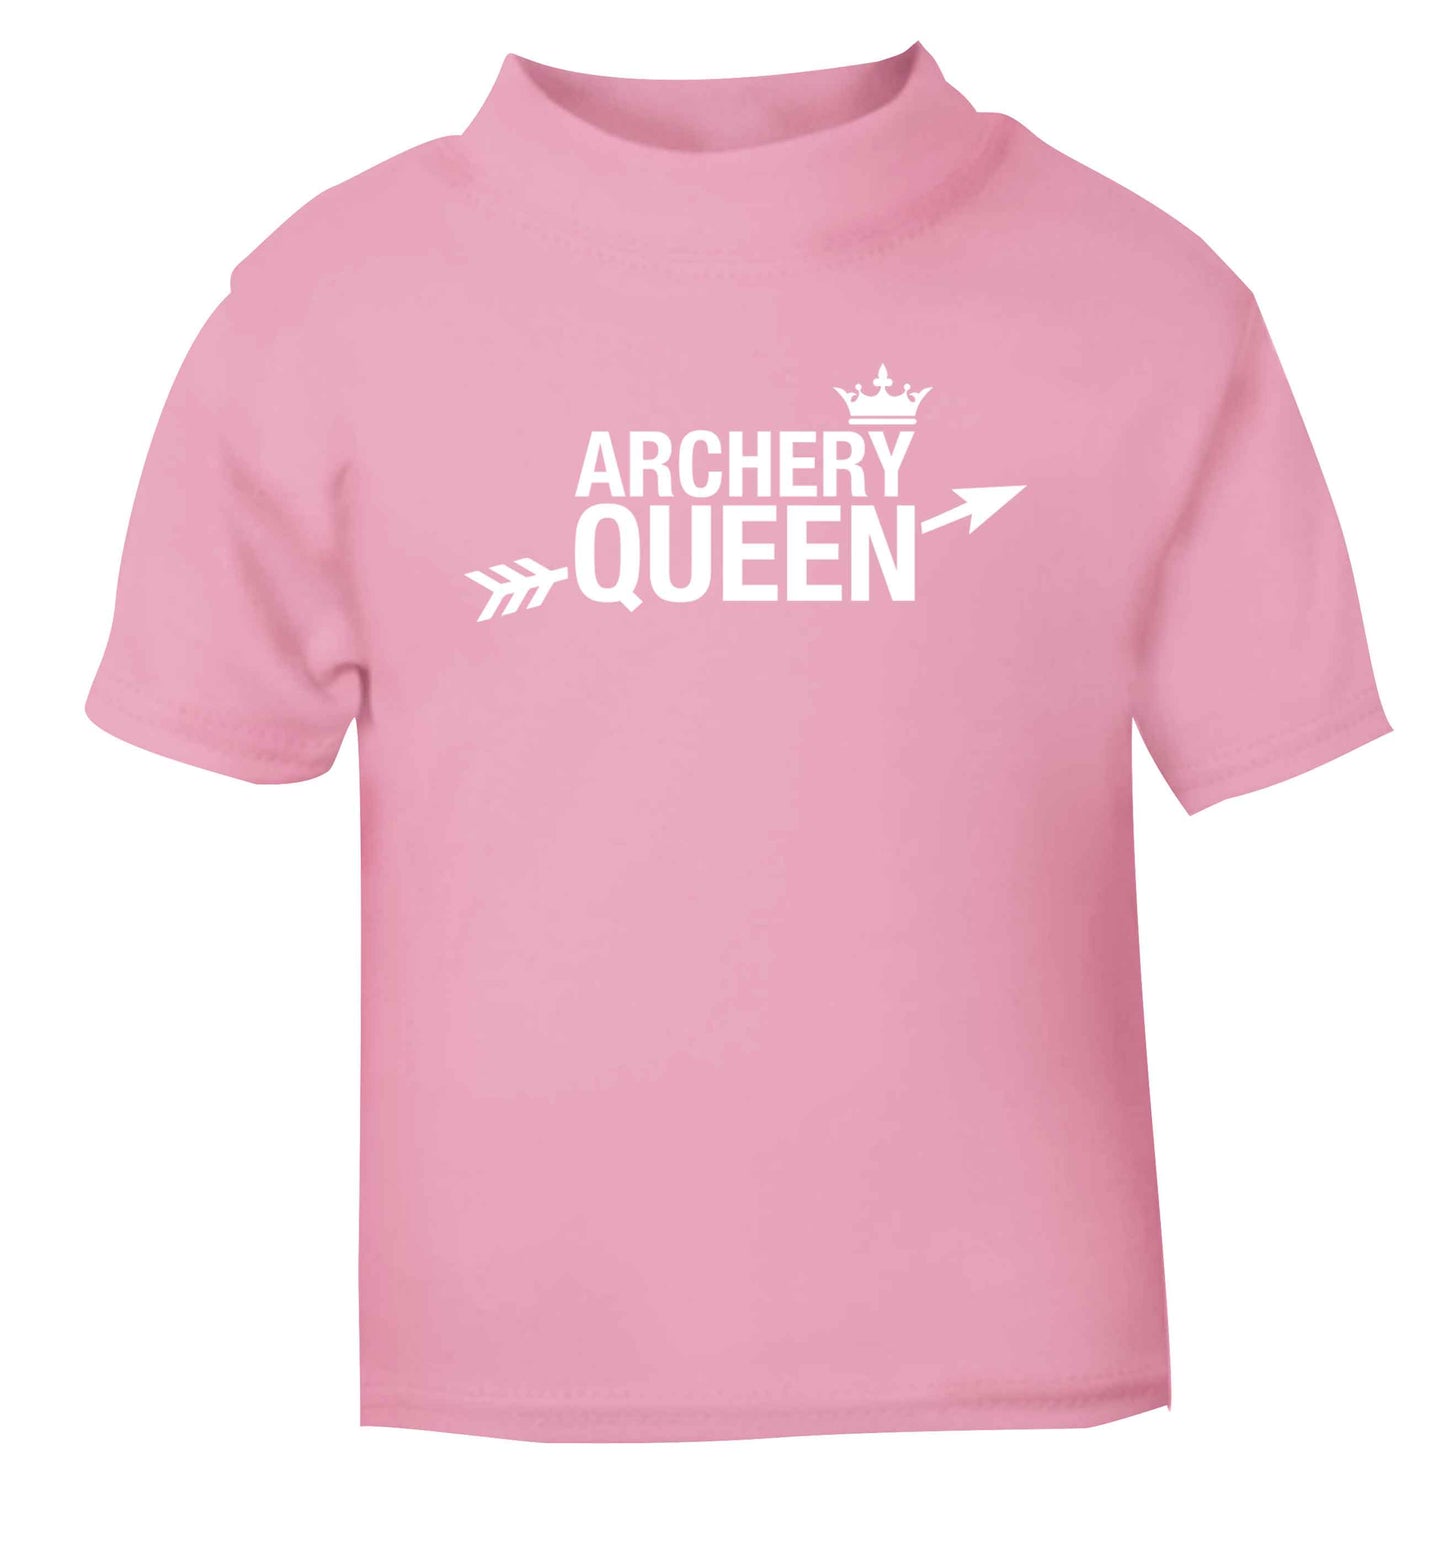 Archery queen light pink Baby Toddler Tshirt 2 Years